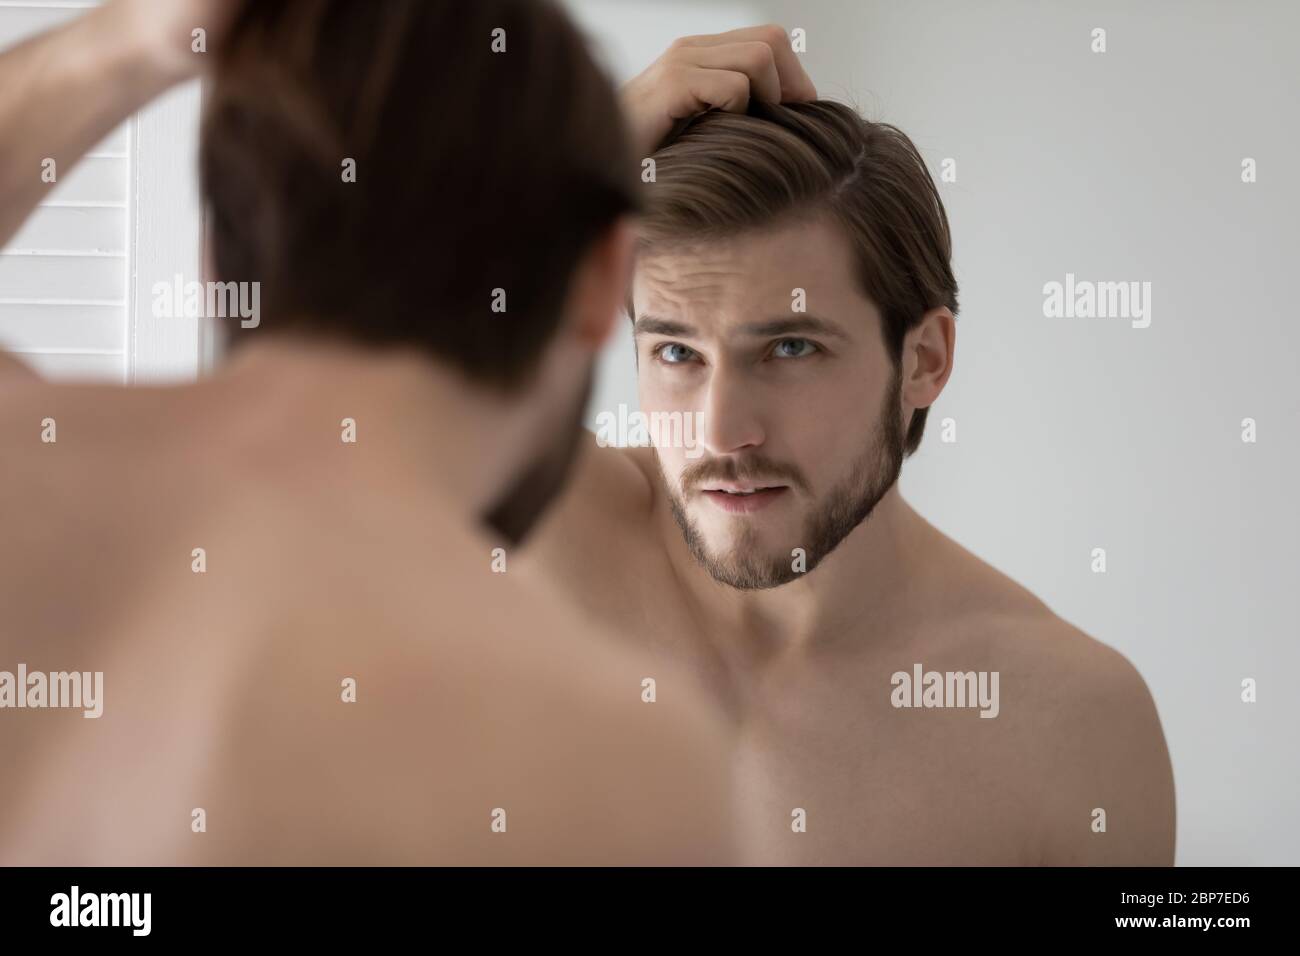 Anxious young man worried about hair loss or receding hairline Stock Photo